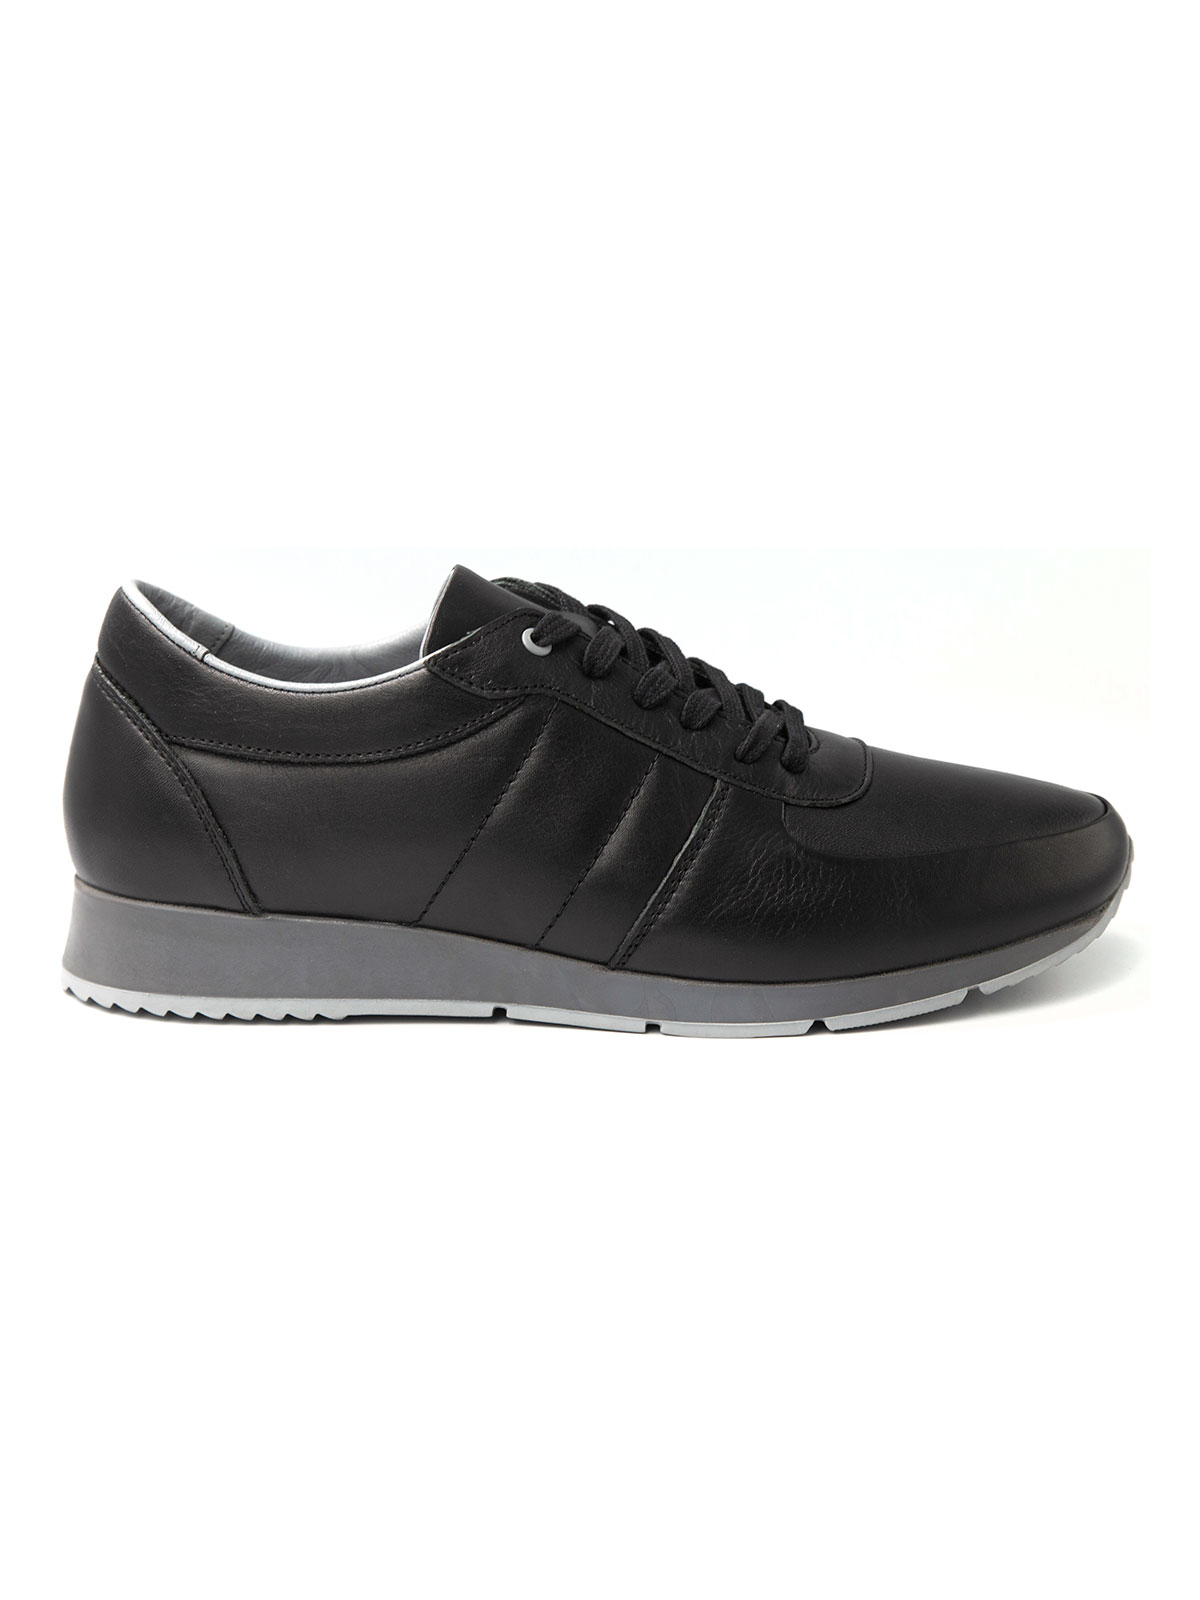 Sporty black leather shoes - 81100 - € 41.62 img3